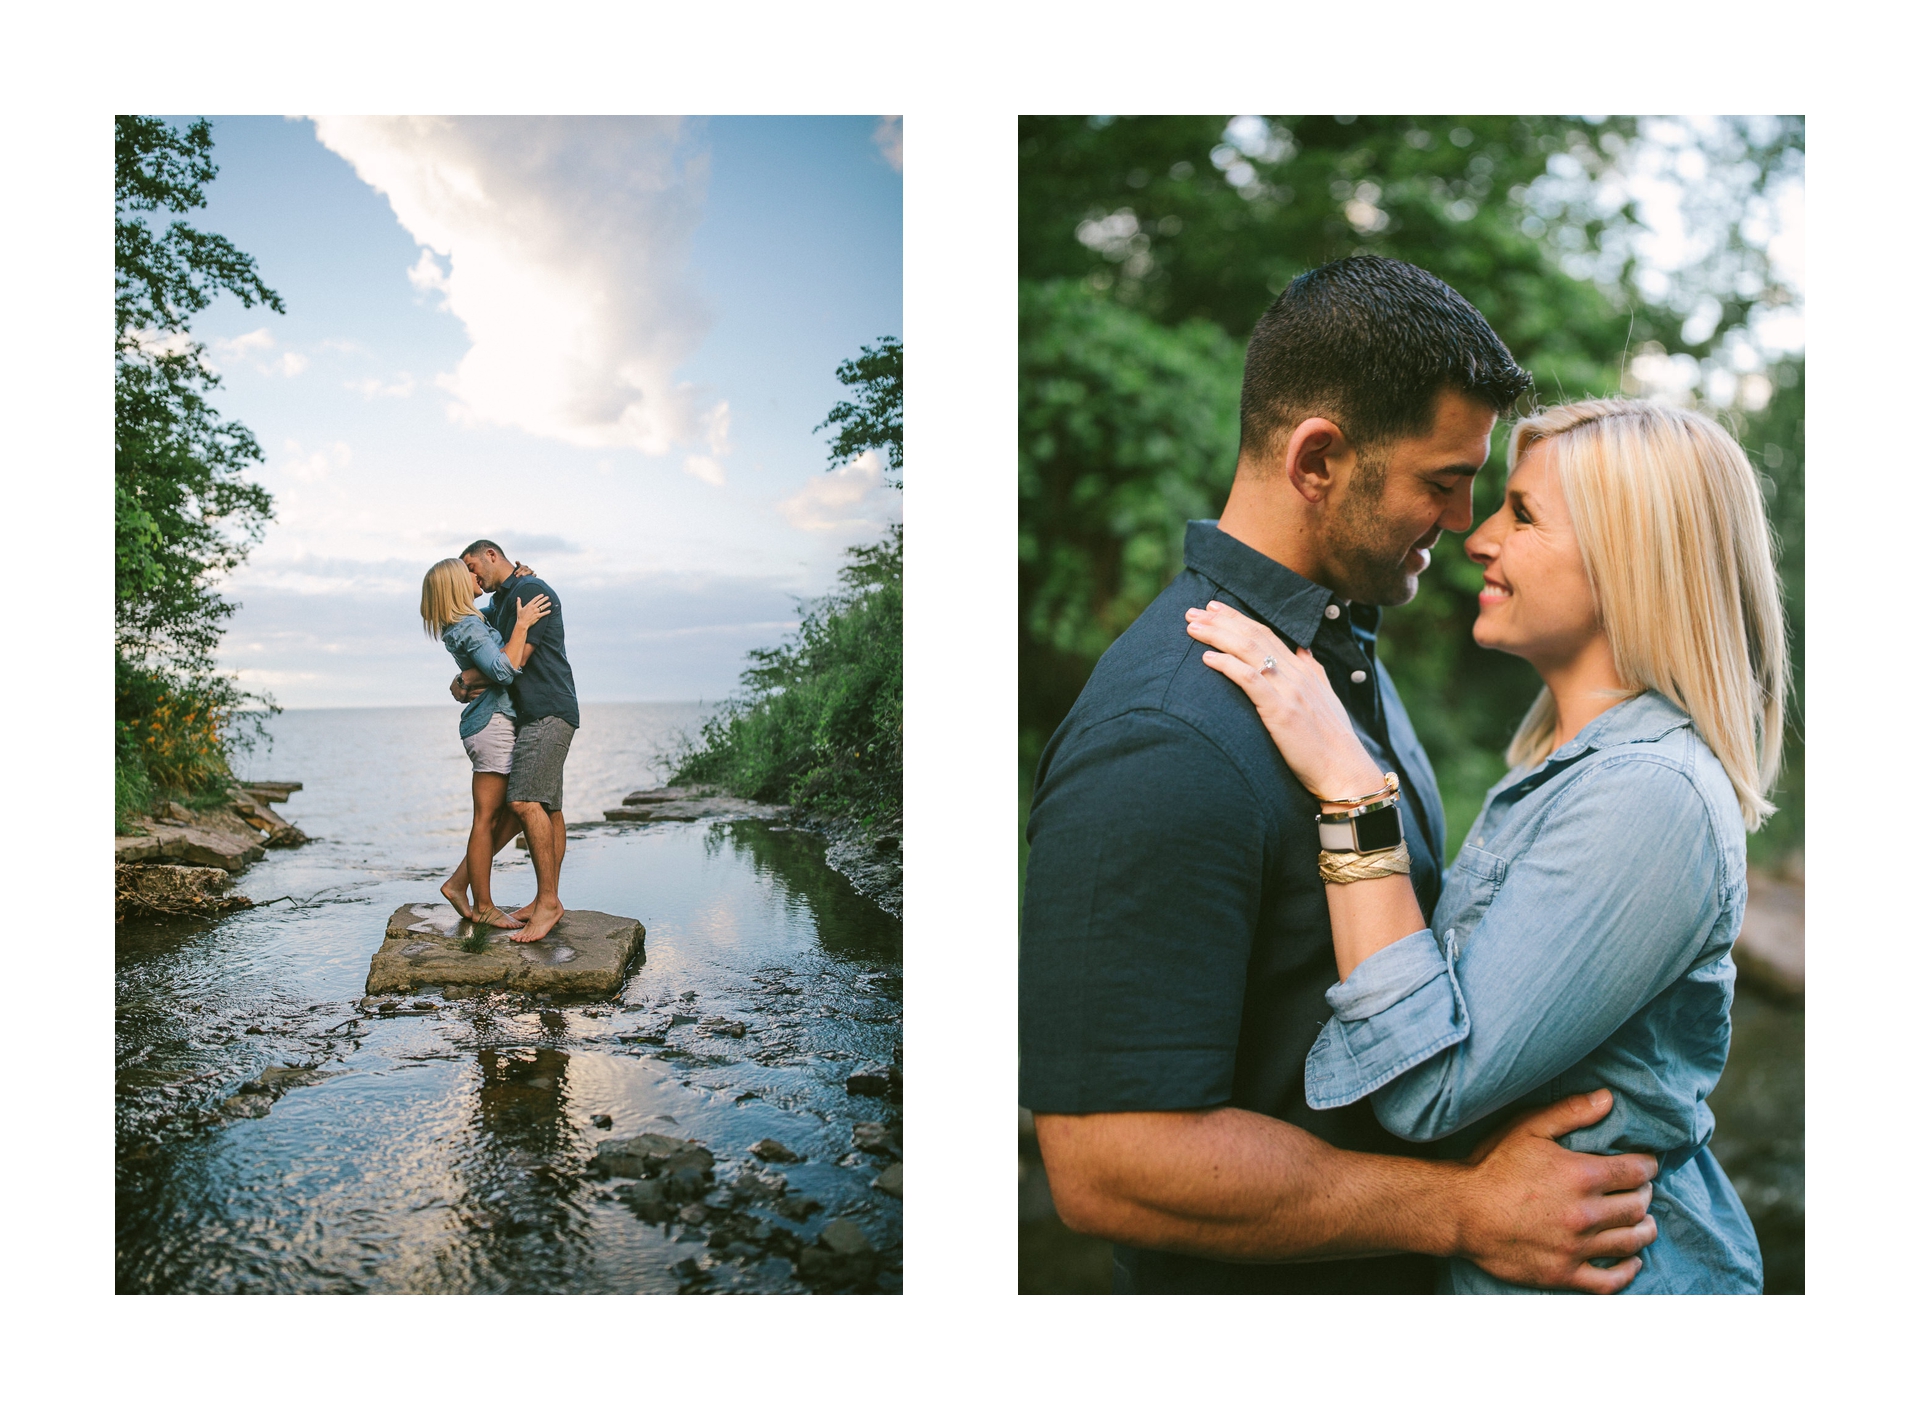 Sara Shookman Angelo DiFranco Engagement photos in cleveland by too much awesomeness photography 21.jpg